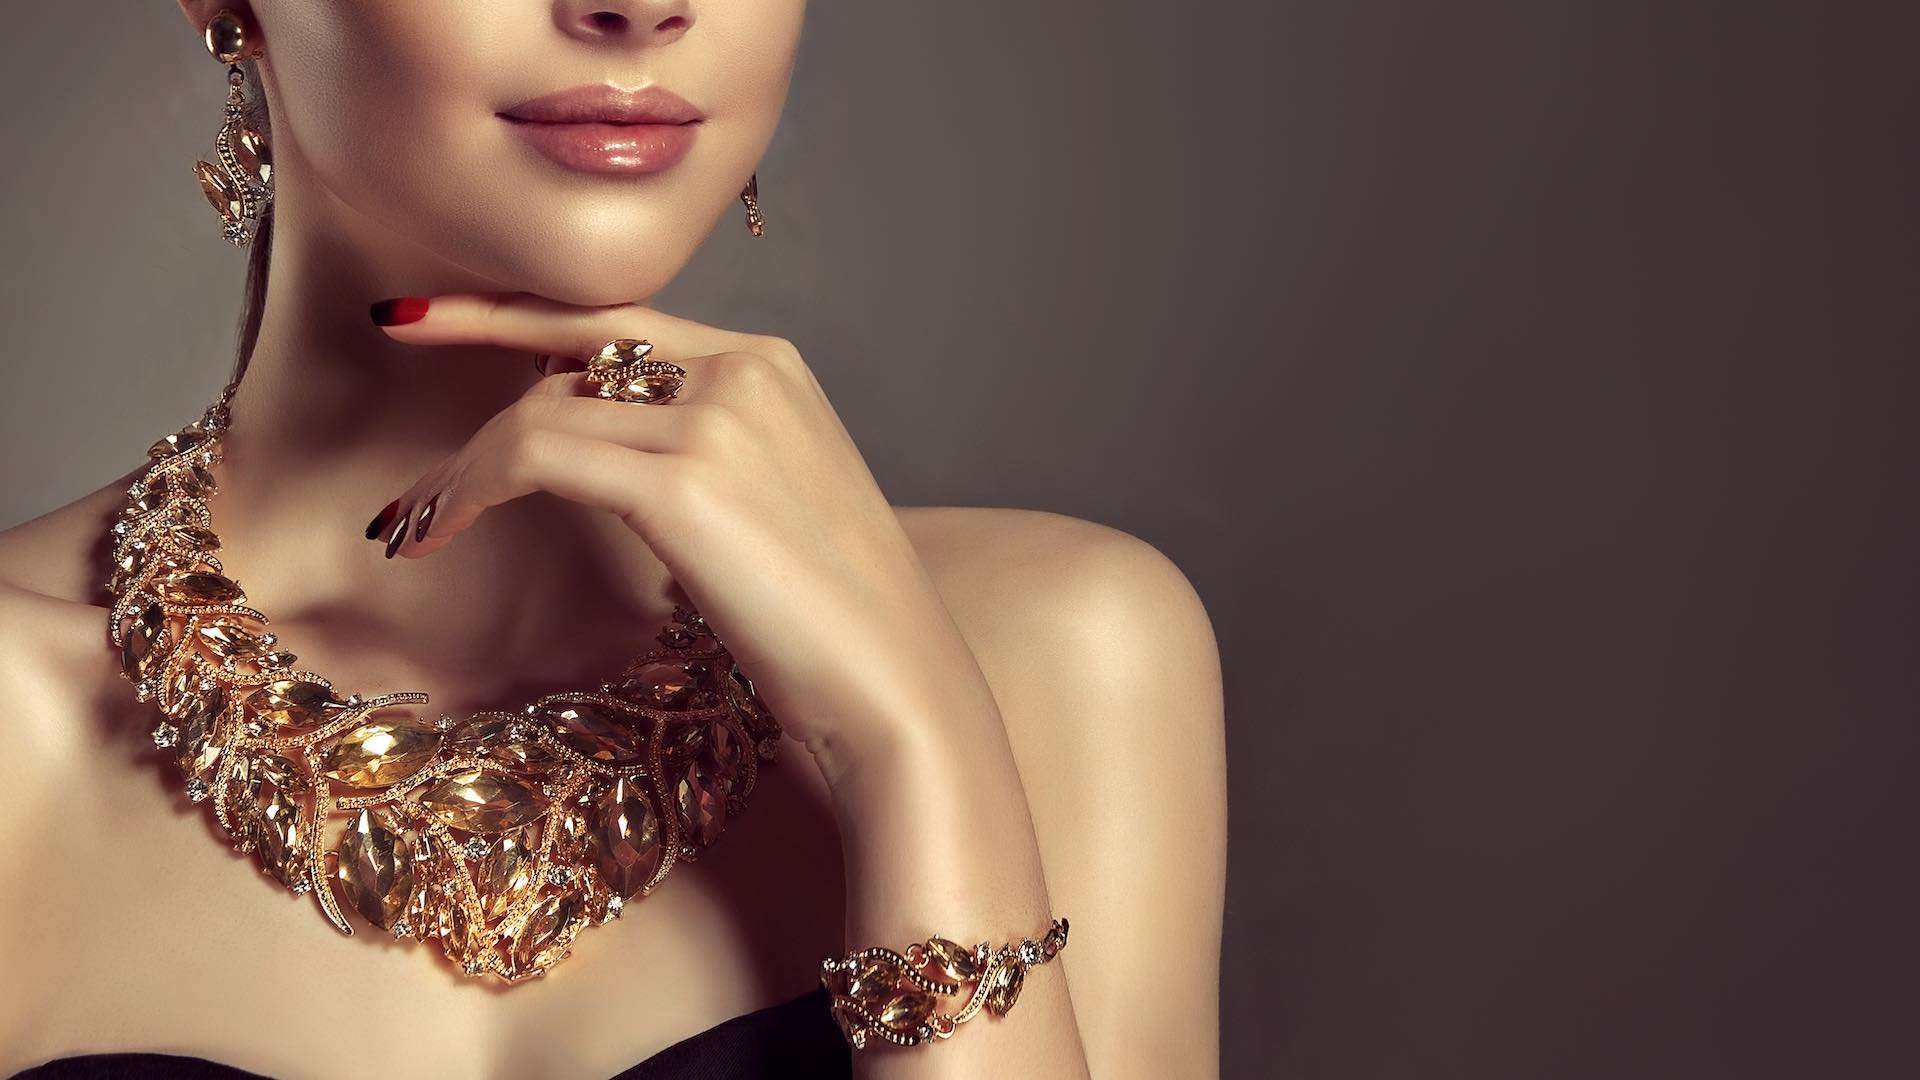 Exports of Indian gems and jewellery increased by 8.26 percent